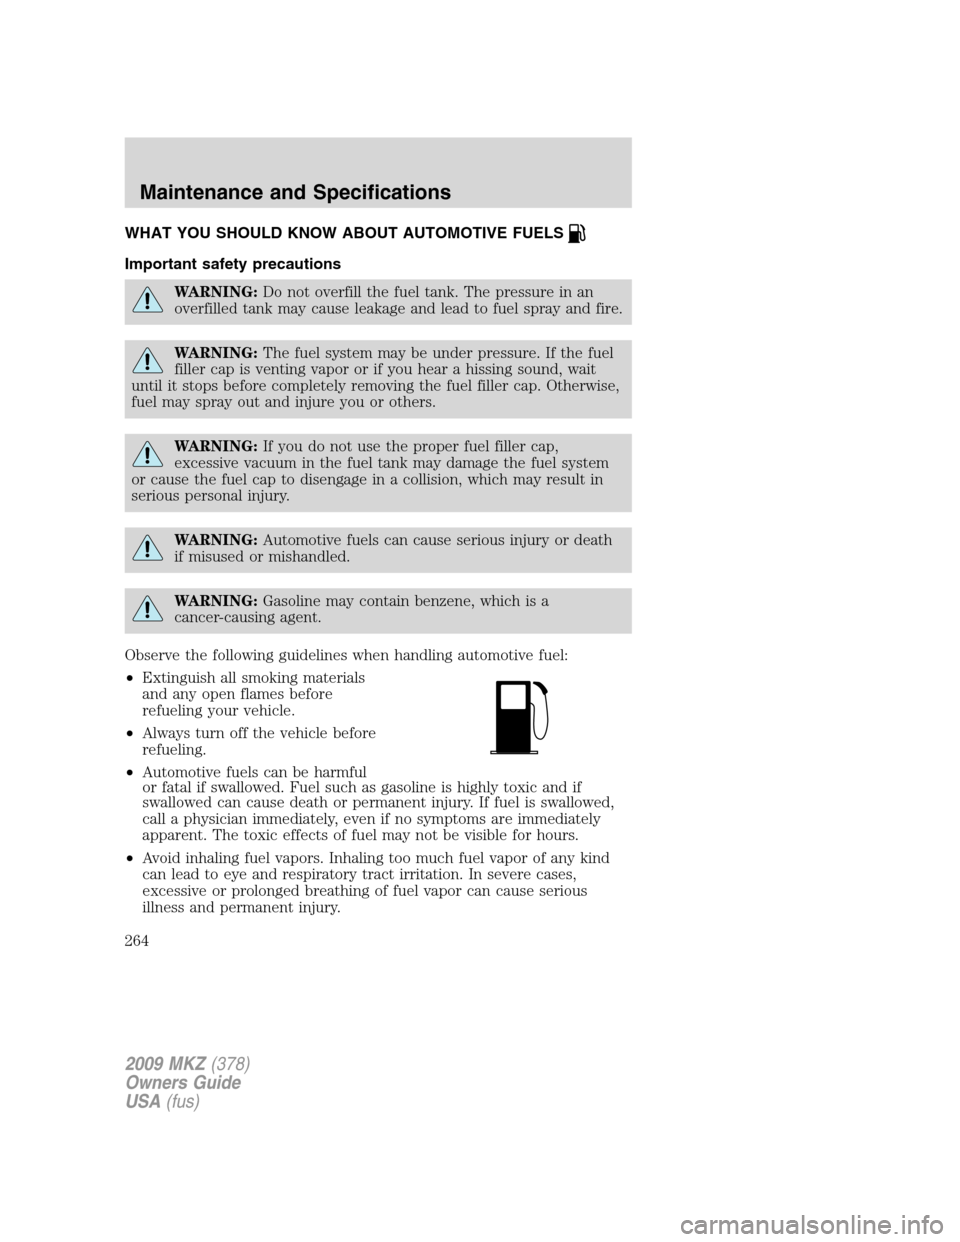 LINCOLN MKZ 2009  Owners Manual WHAT YOU SHOULD KNOW ABOUT AUTOMOTIVE FUELS
Important safety precautions
WARNING:Do not overfill the fuel tank. The pressure in an
overfilled tank may cause leakage and lead to fuel spray and fire.
WA